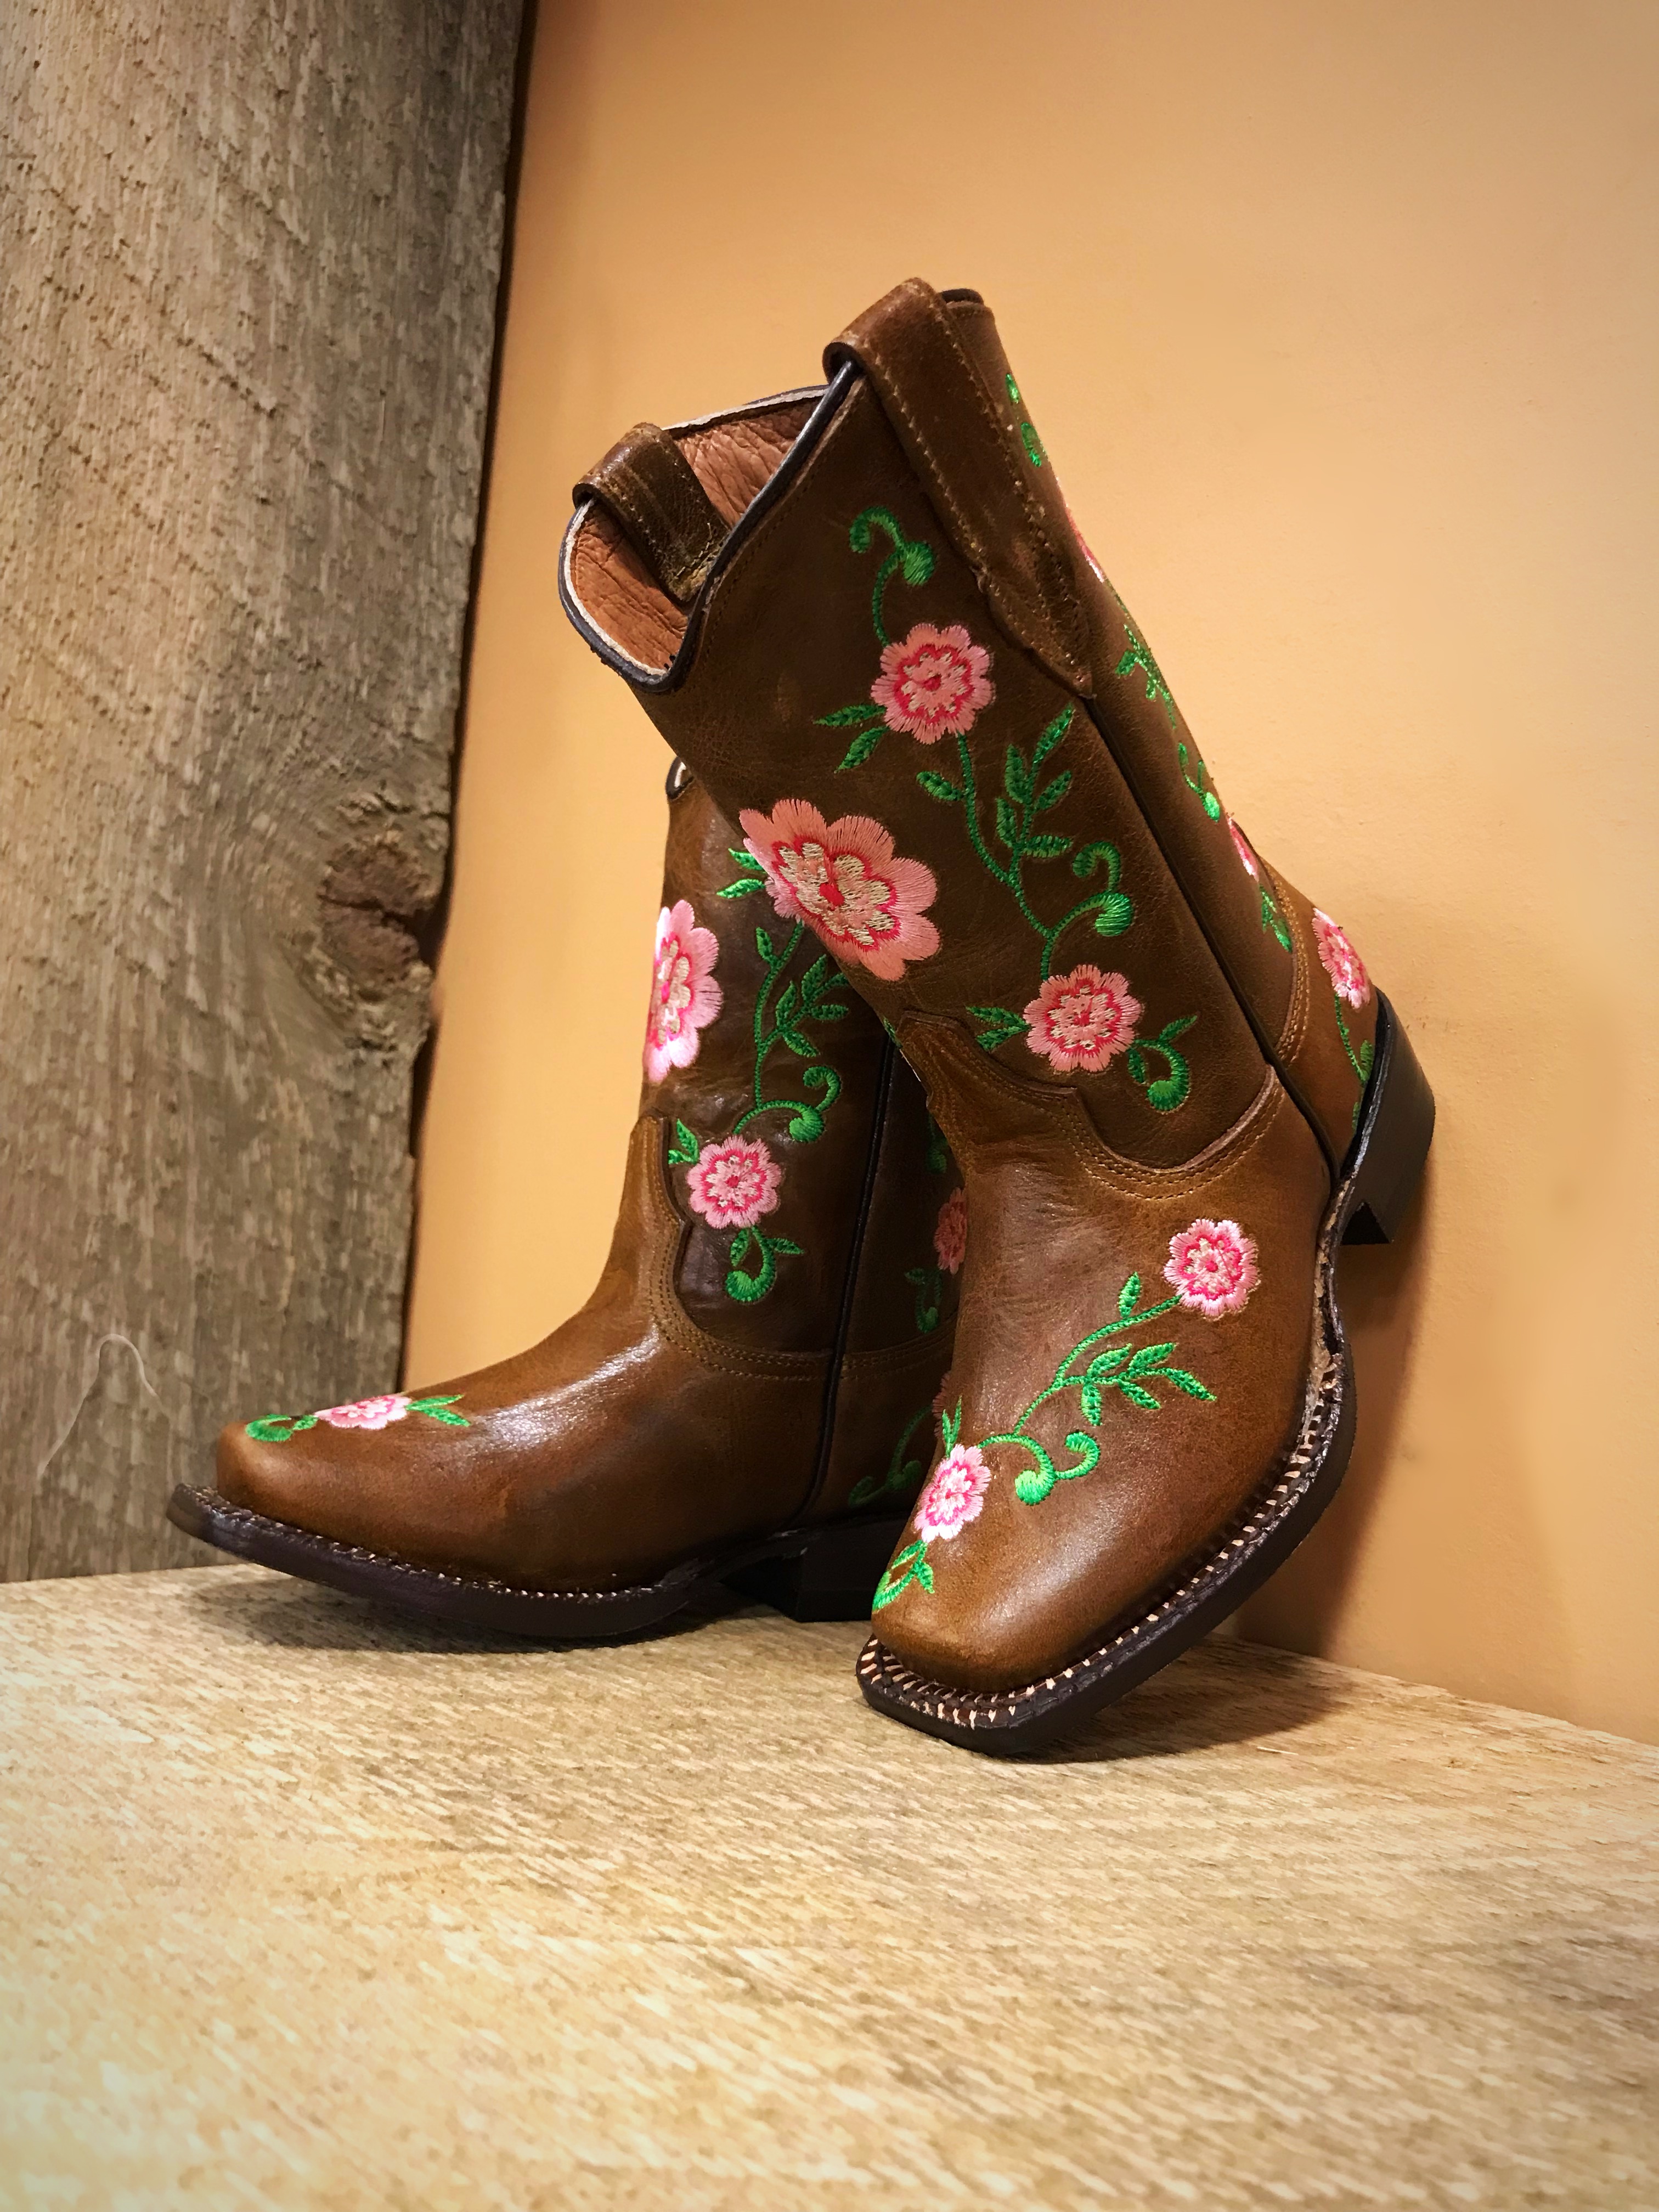 Girls Floral Embroidery Cowgirl Boots 